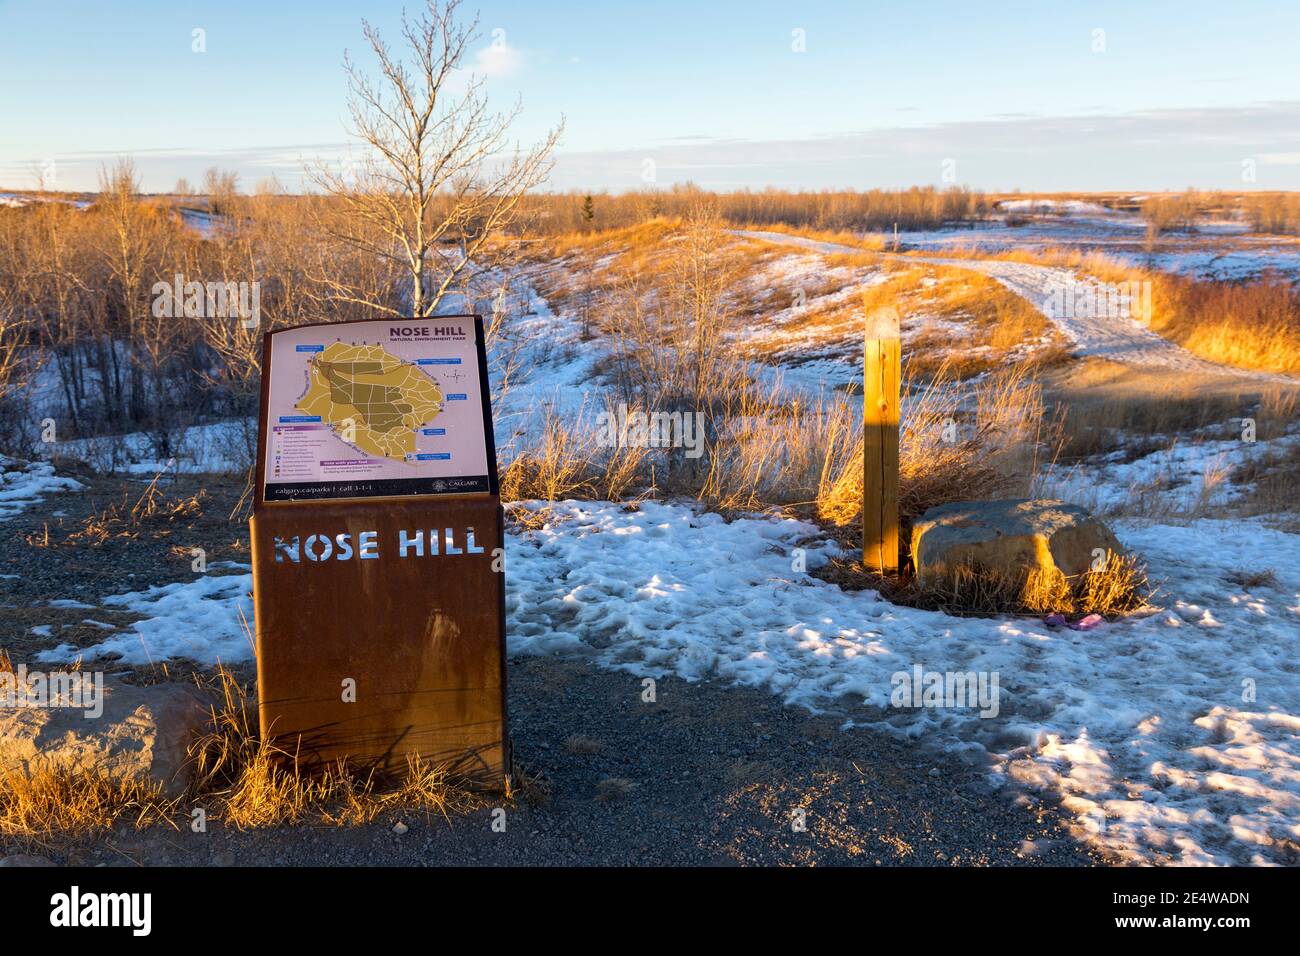 Entrance Information Table and Map of Nose Hill in Calgary, Alberta, largest urban natural parkland in Canada Stock Photo